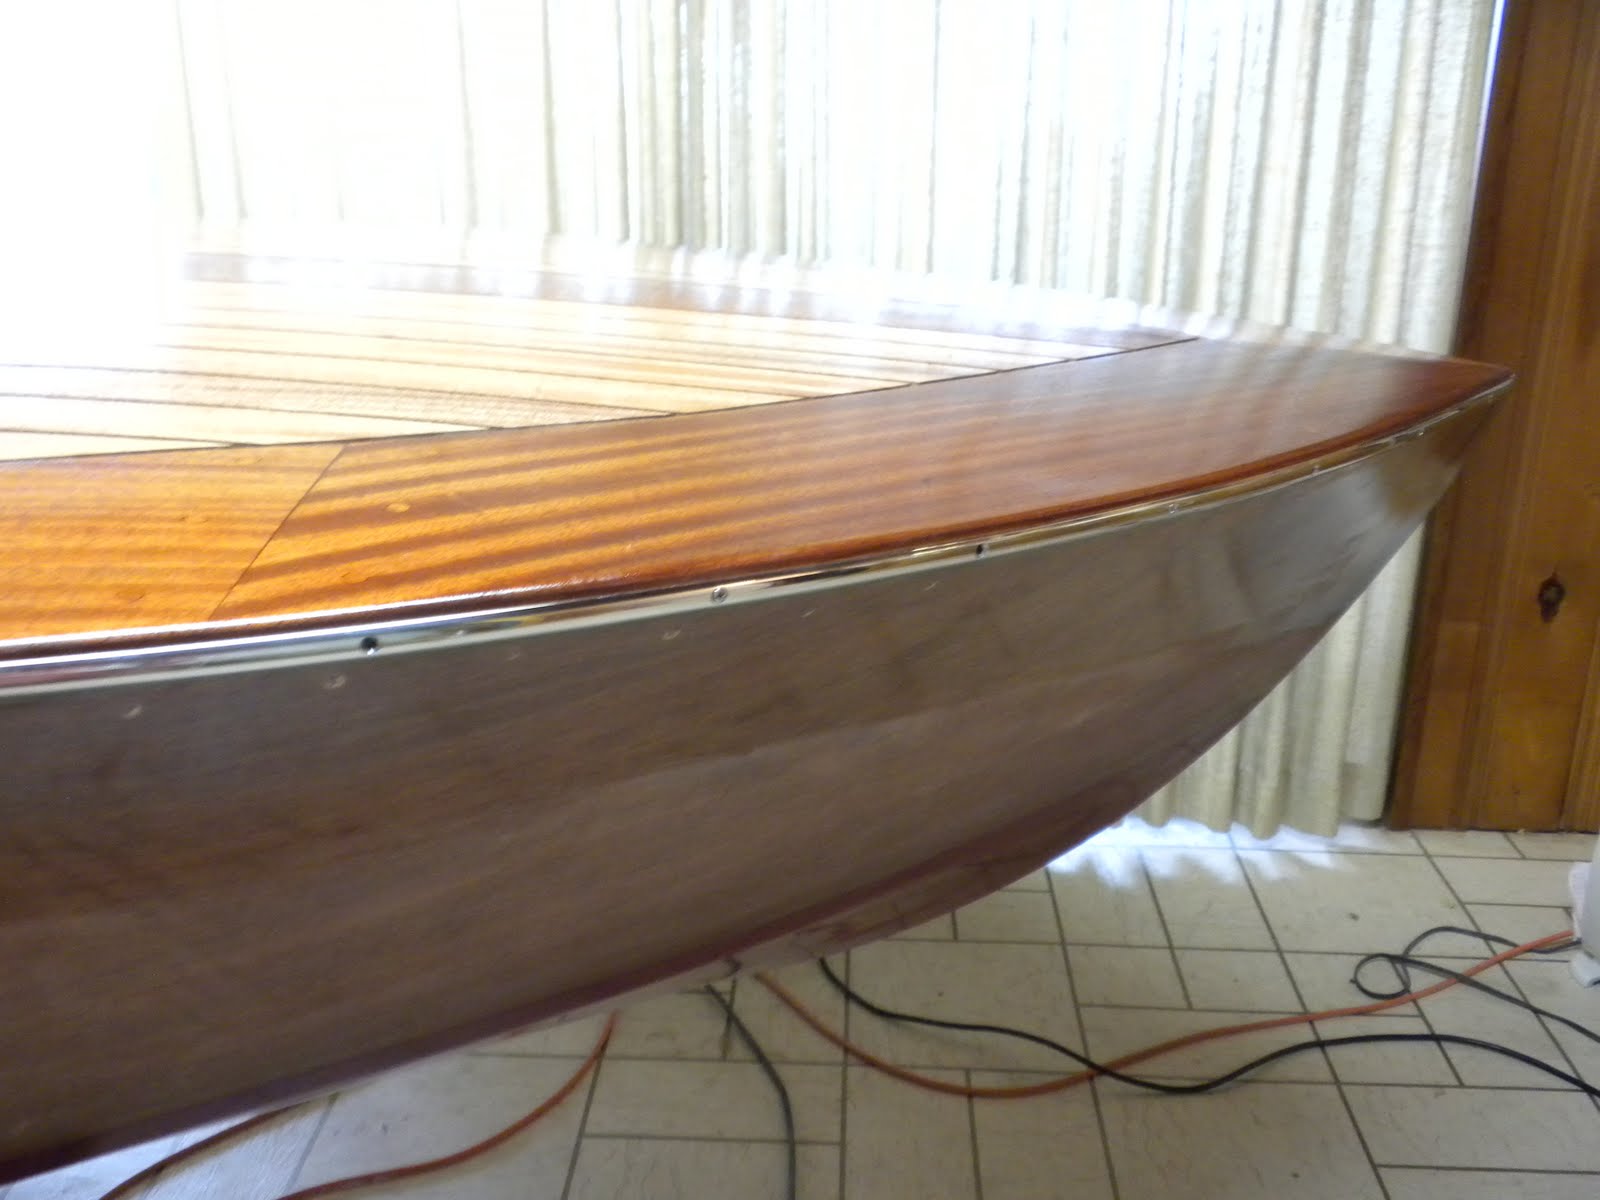 Ted's Wood Boat: Stainless Steel Rail Trim and Epoxy Problems